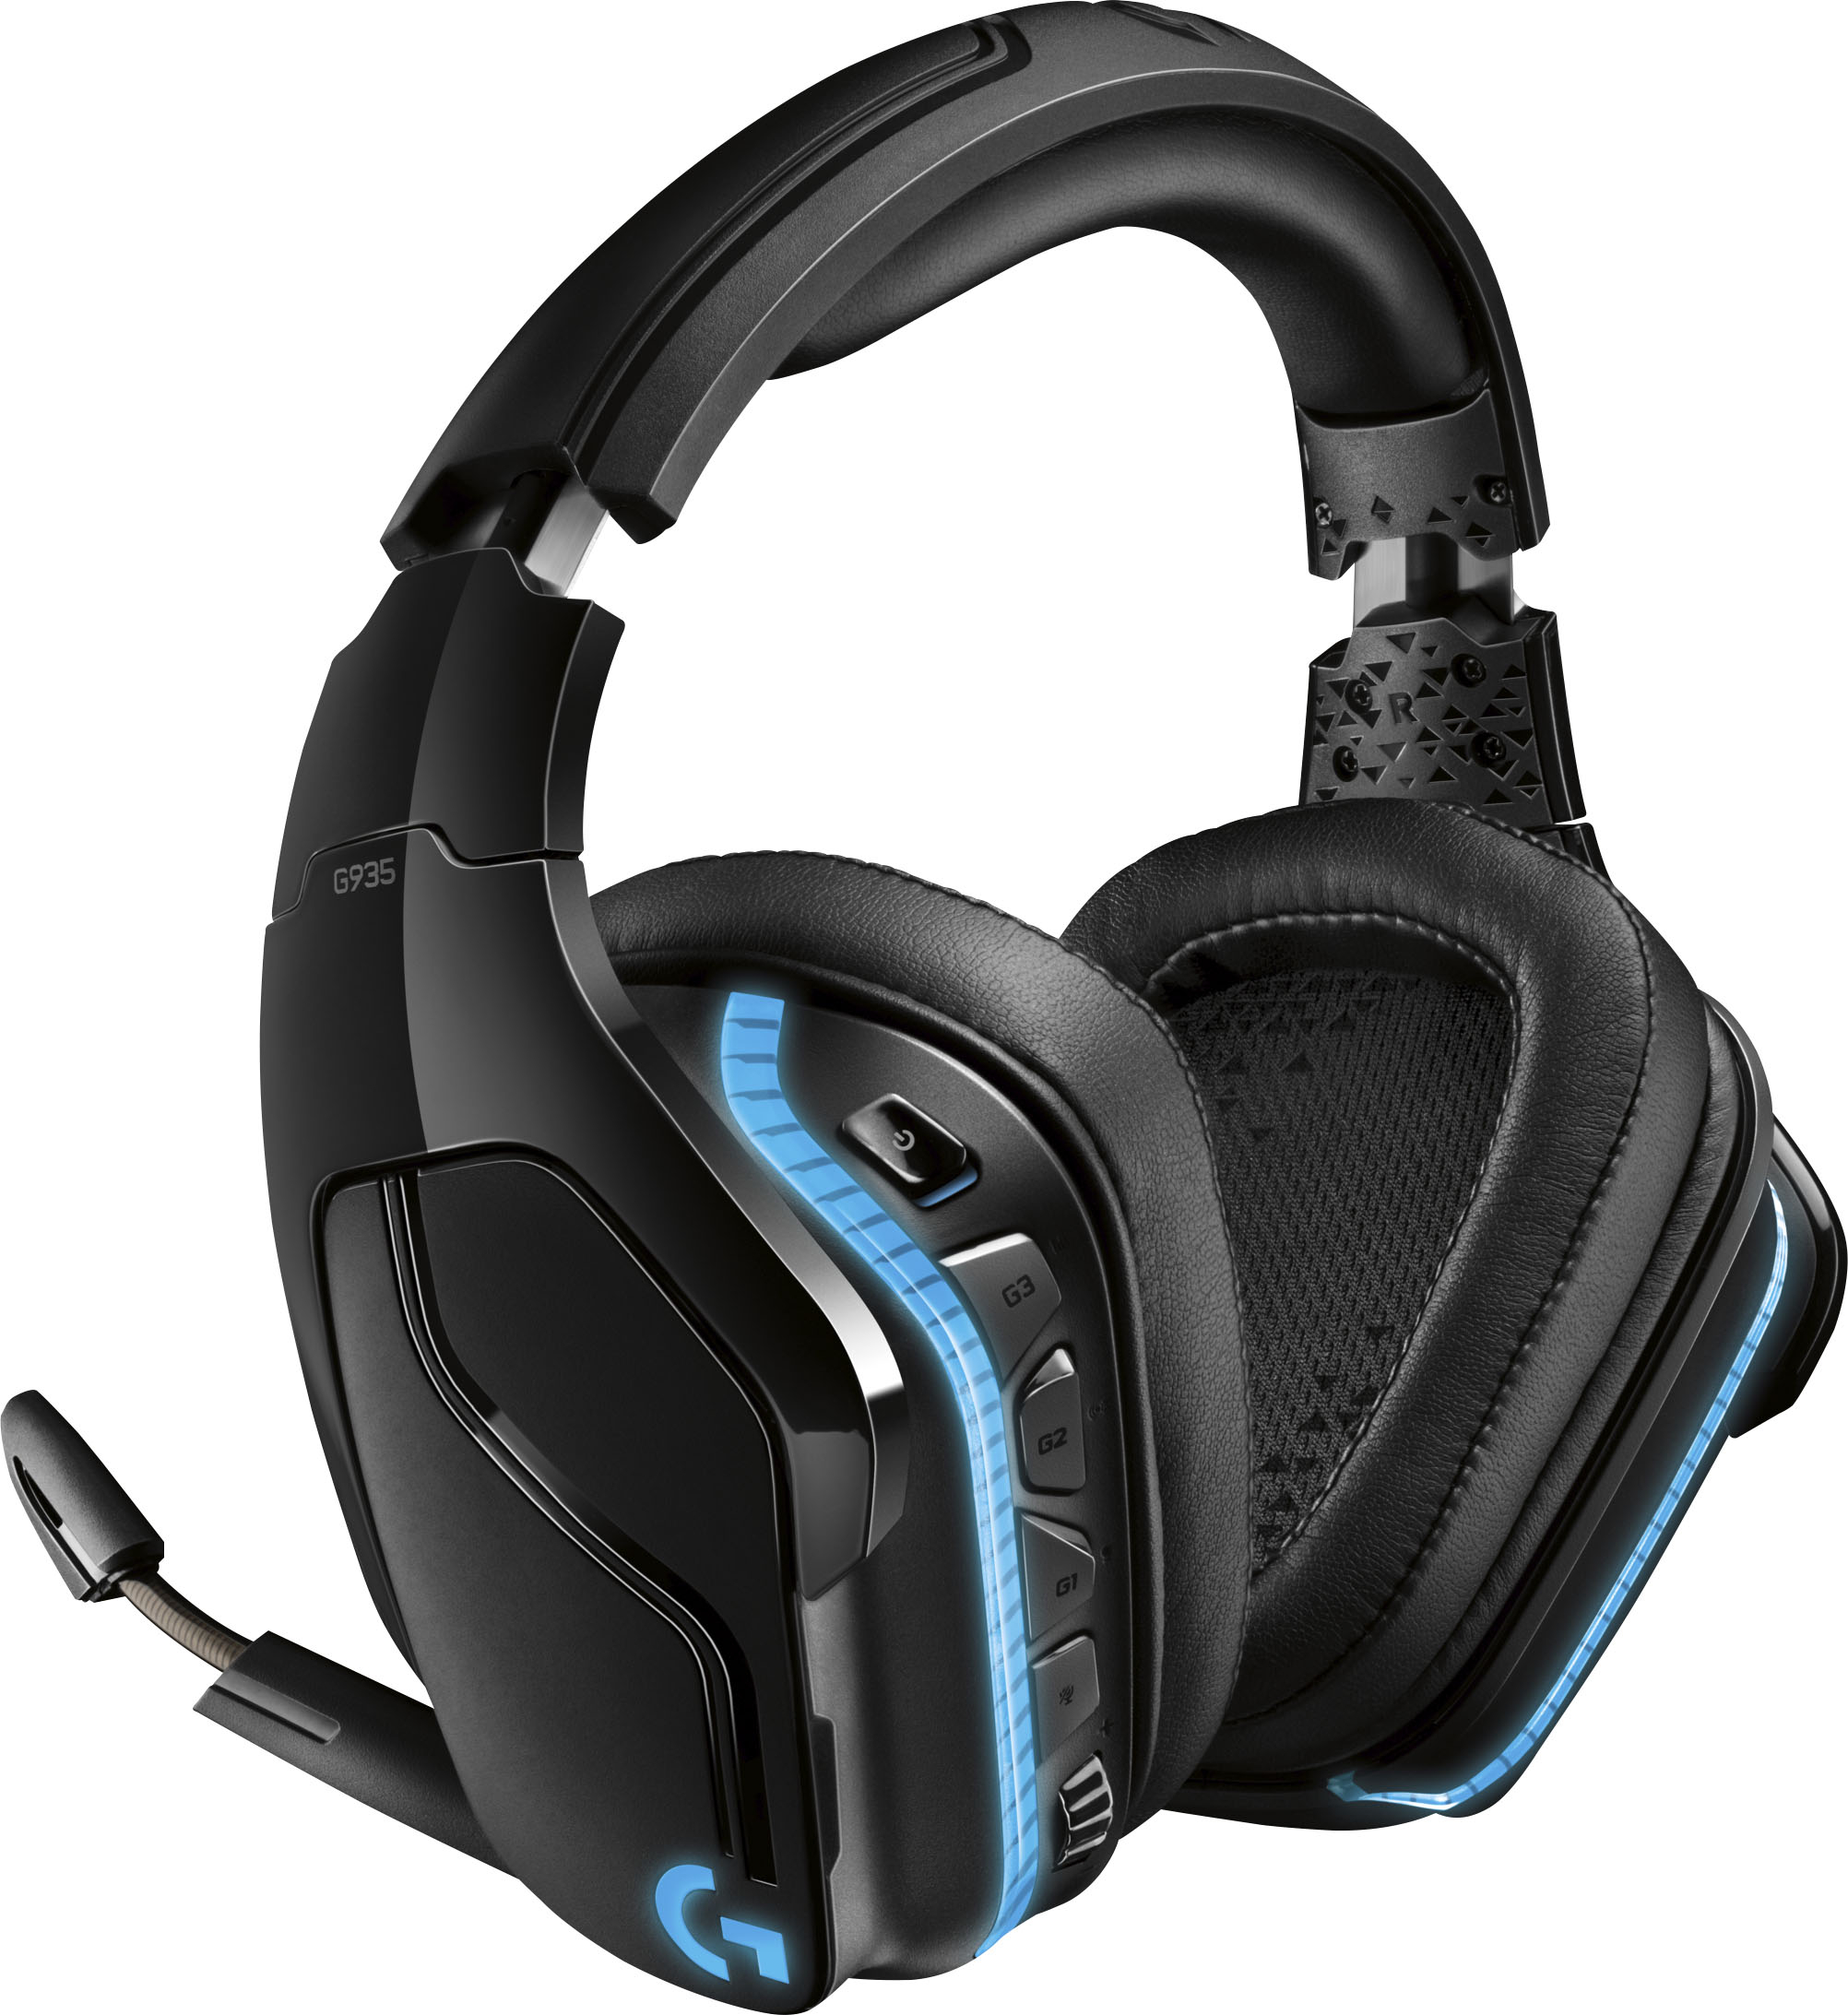 klep schotel engineering Logitech G935 Wireless 7.1 Surround Sound Over-the-Ear Gaming Headset for PC  with LIGHTSYNC RGB Lighting Black/Blue 981-000742 - Best Buy